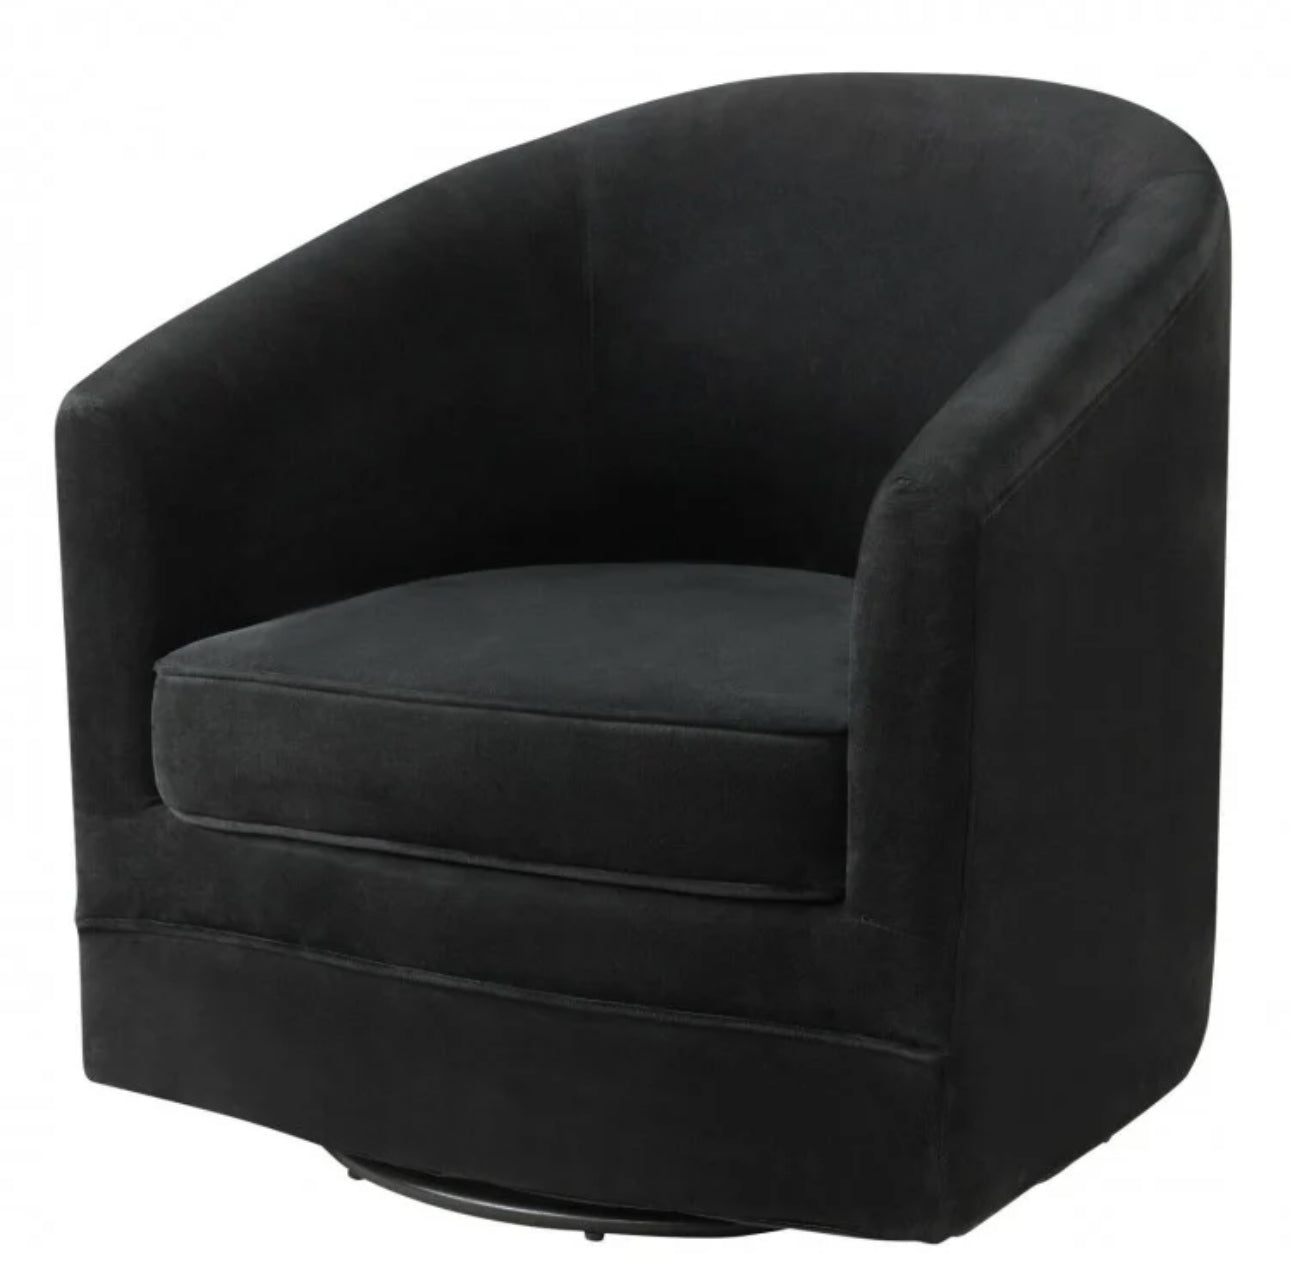 Heavy Duty Modern & Classic Comfortable Accent Chair With 360-Degree Swivel Metal Base For Living Room, Office, Cottage